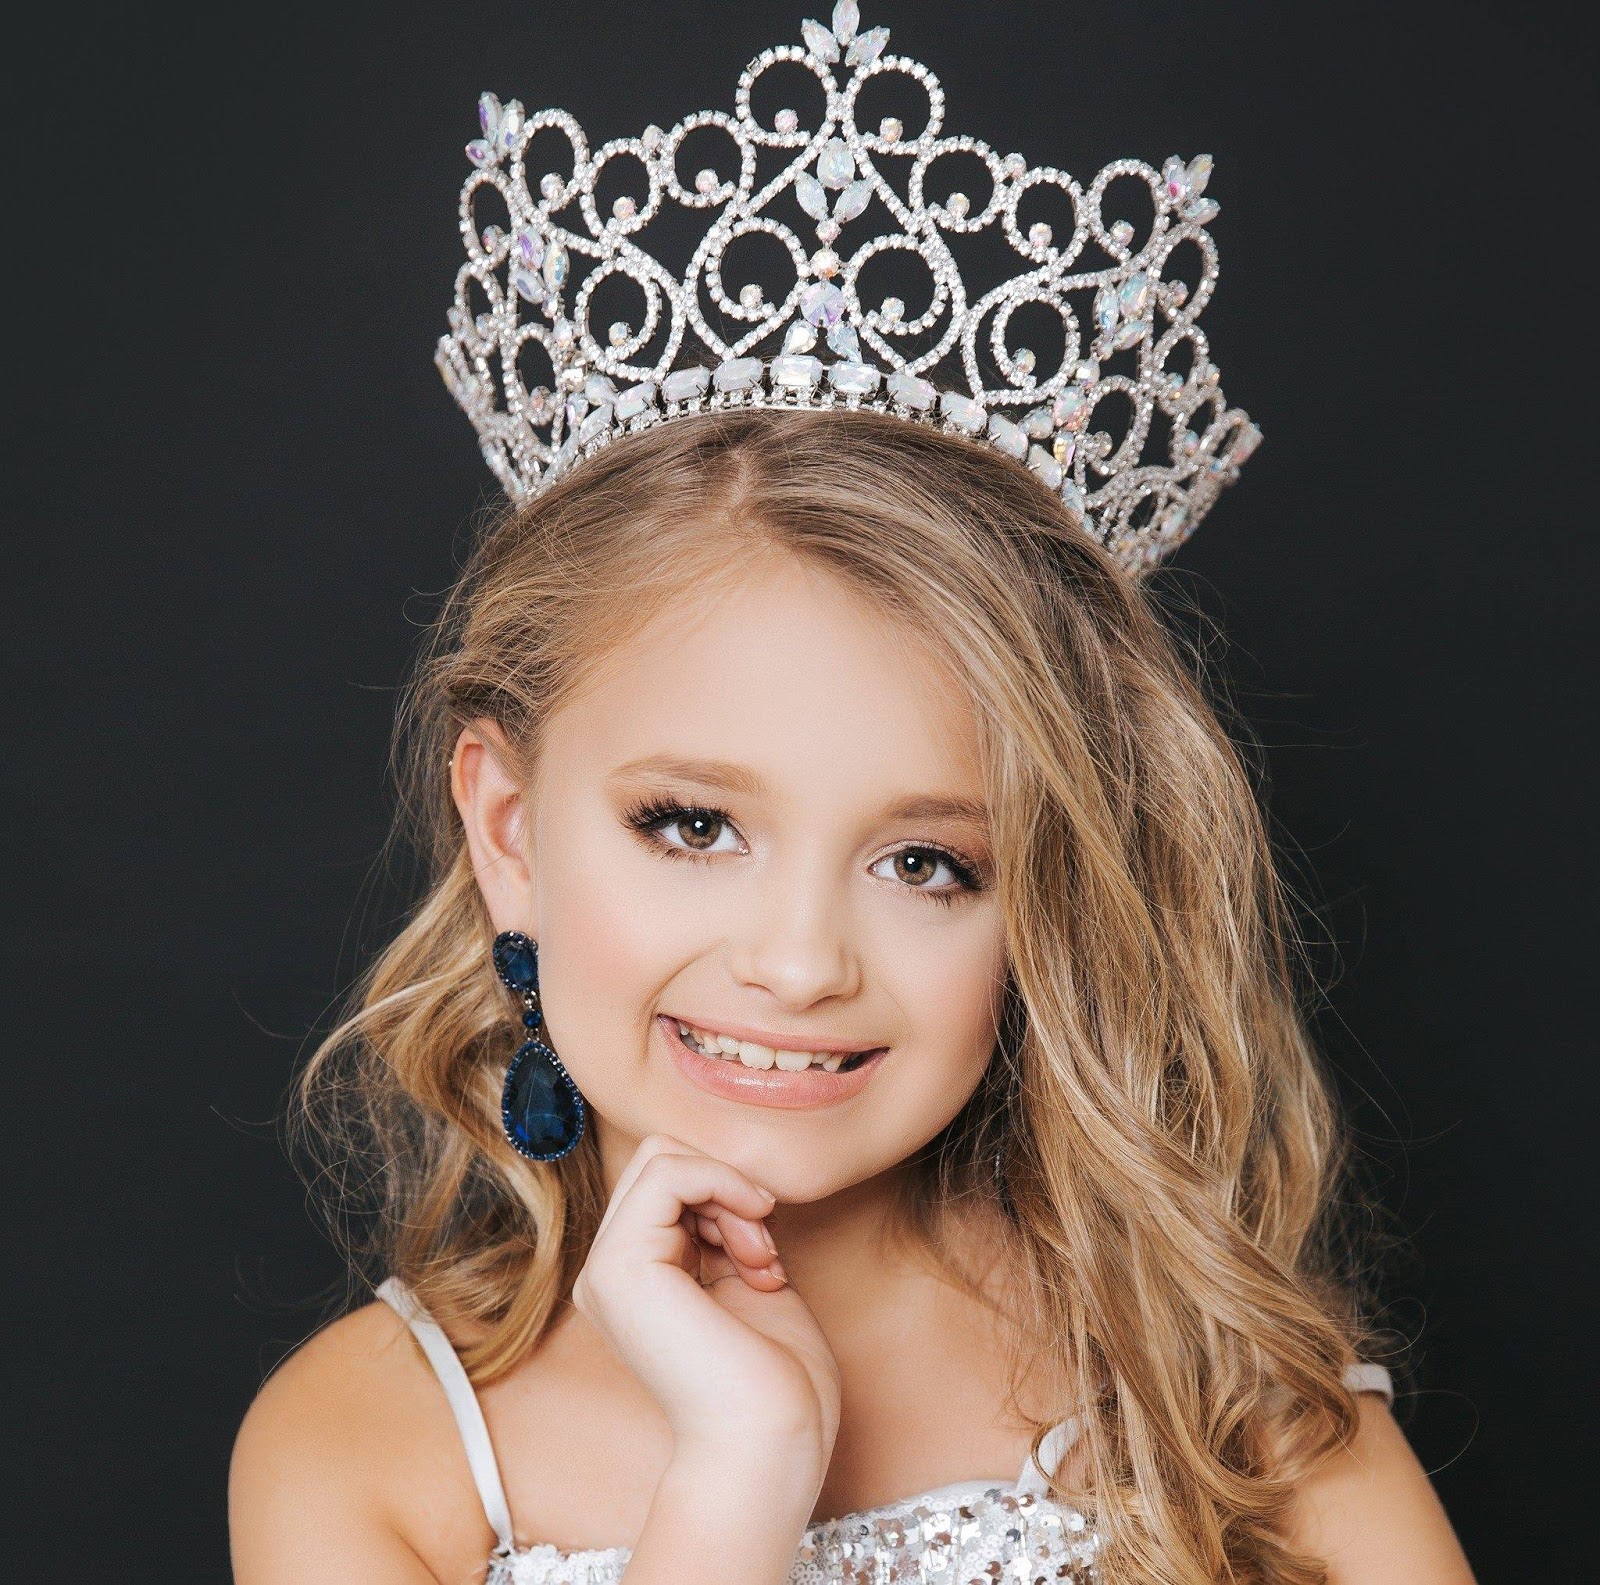 First up I have Mia, the first Young European International Junior Miss, wh...